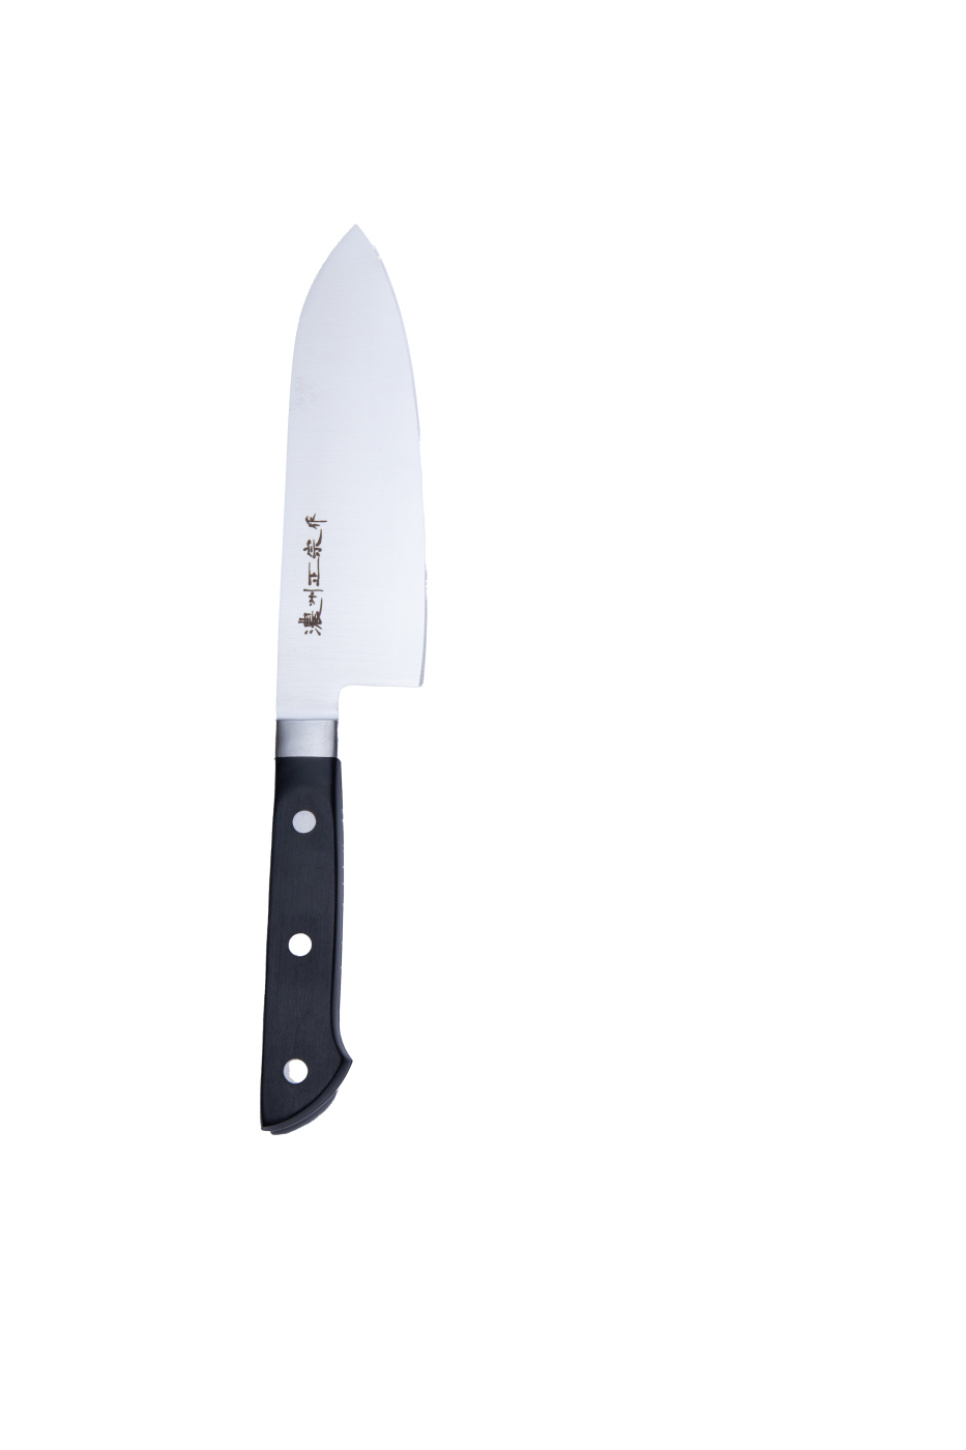 Santoku 17cm - Pro House in the group Cooking / Kitchen knives / Santoku knives at KitchenLab (1450-27645)